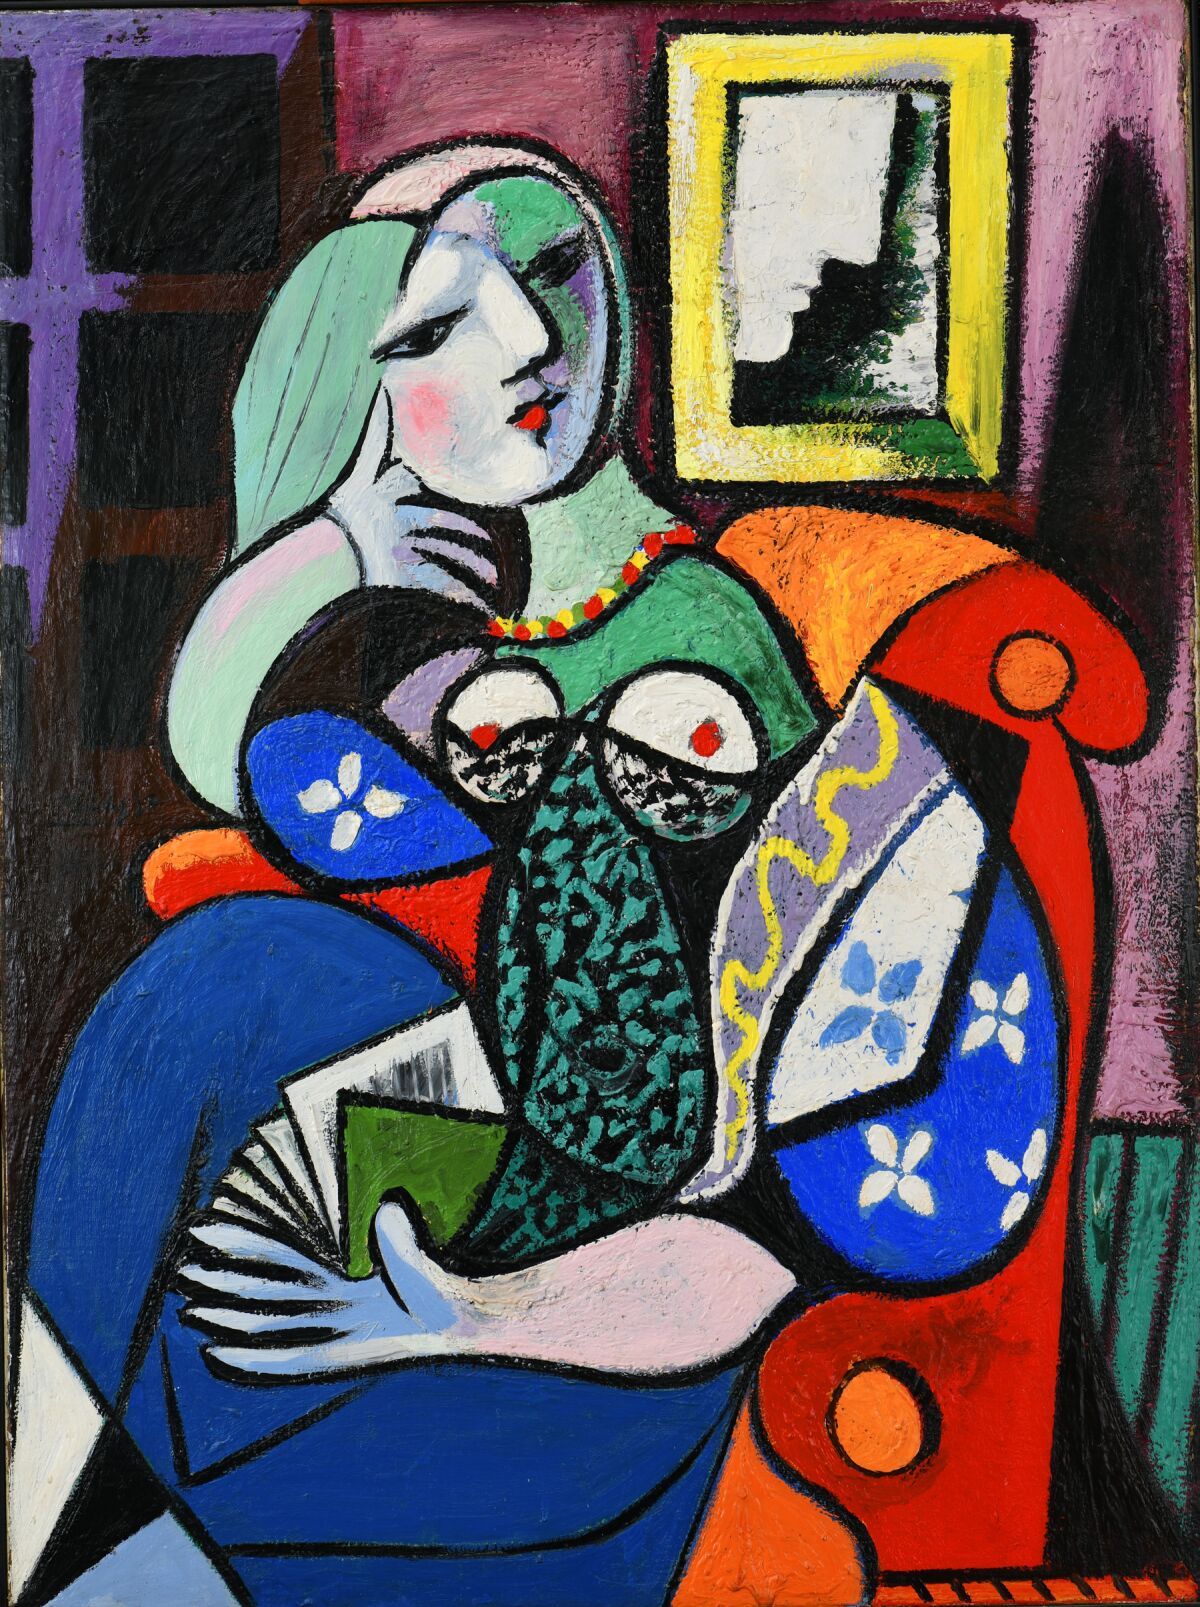 Smashing Picasso shows at the Norton Simon, Hammer museums - Times